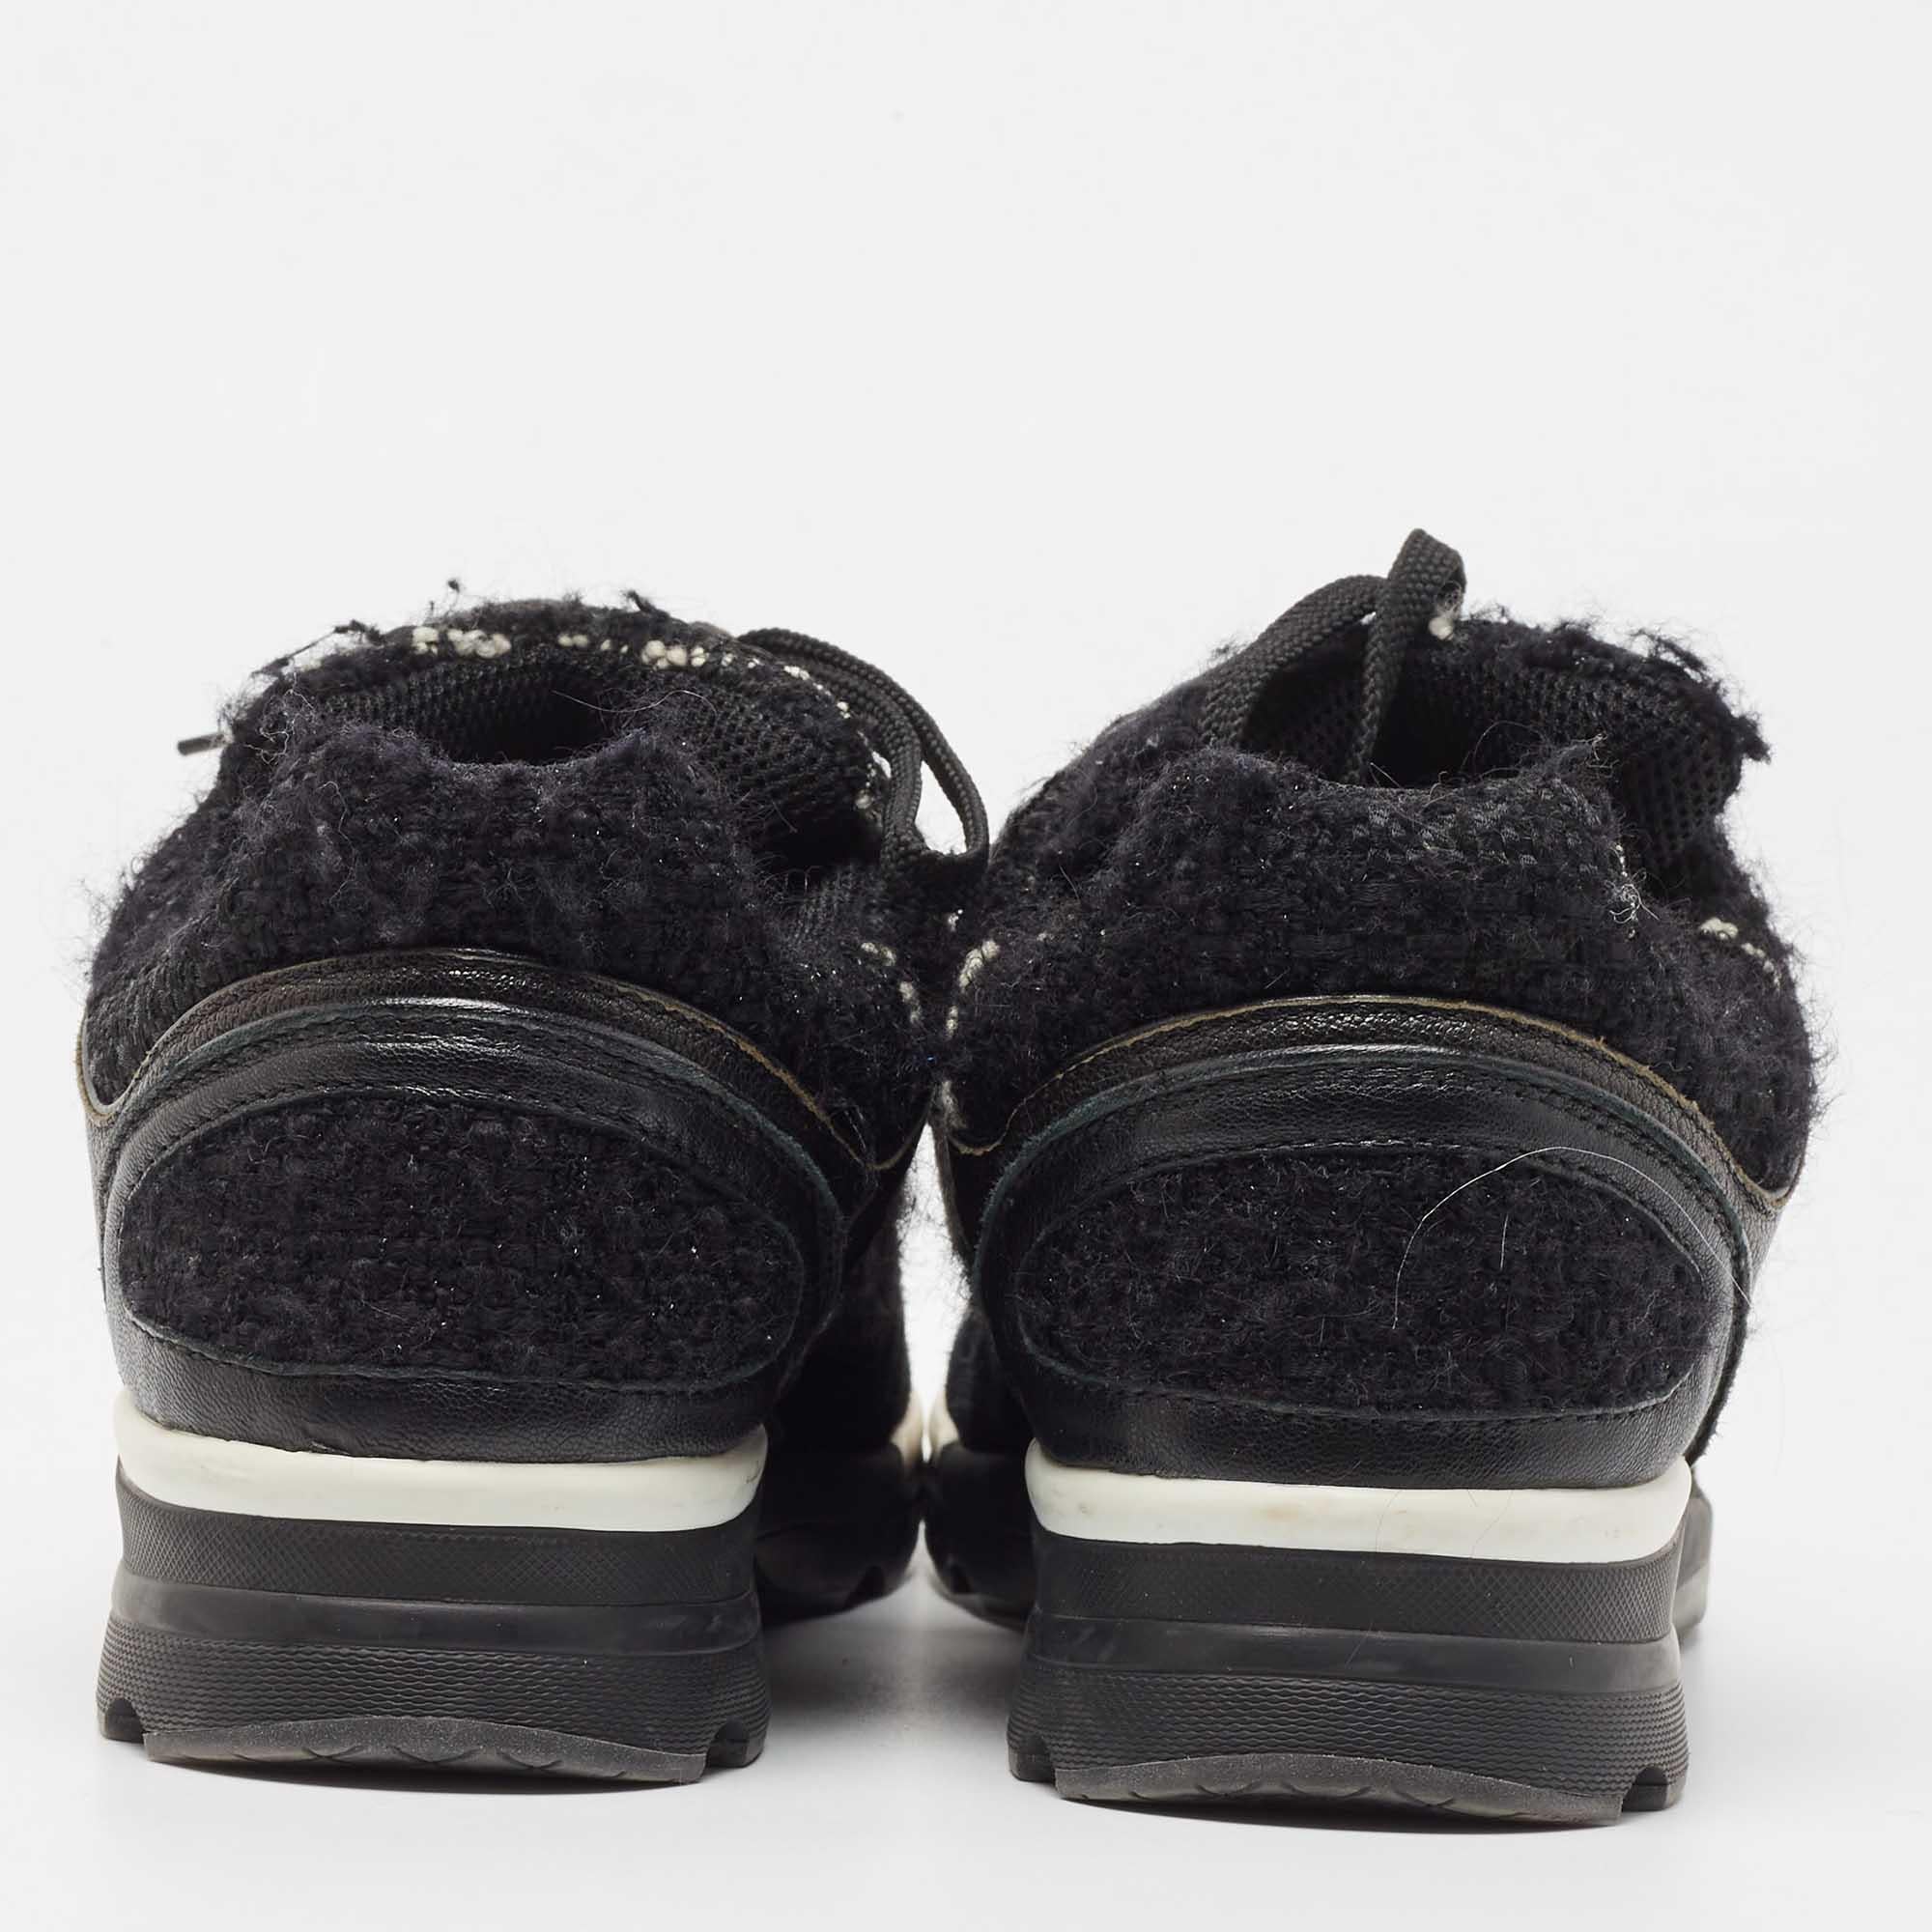 Chanel Black Suede and Tweed Interlocking CC Logo Low Top Sneakers Size 40.5 For Sale 1